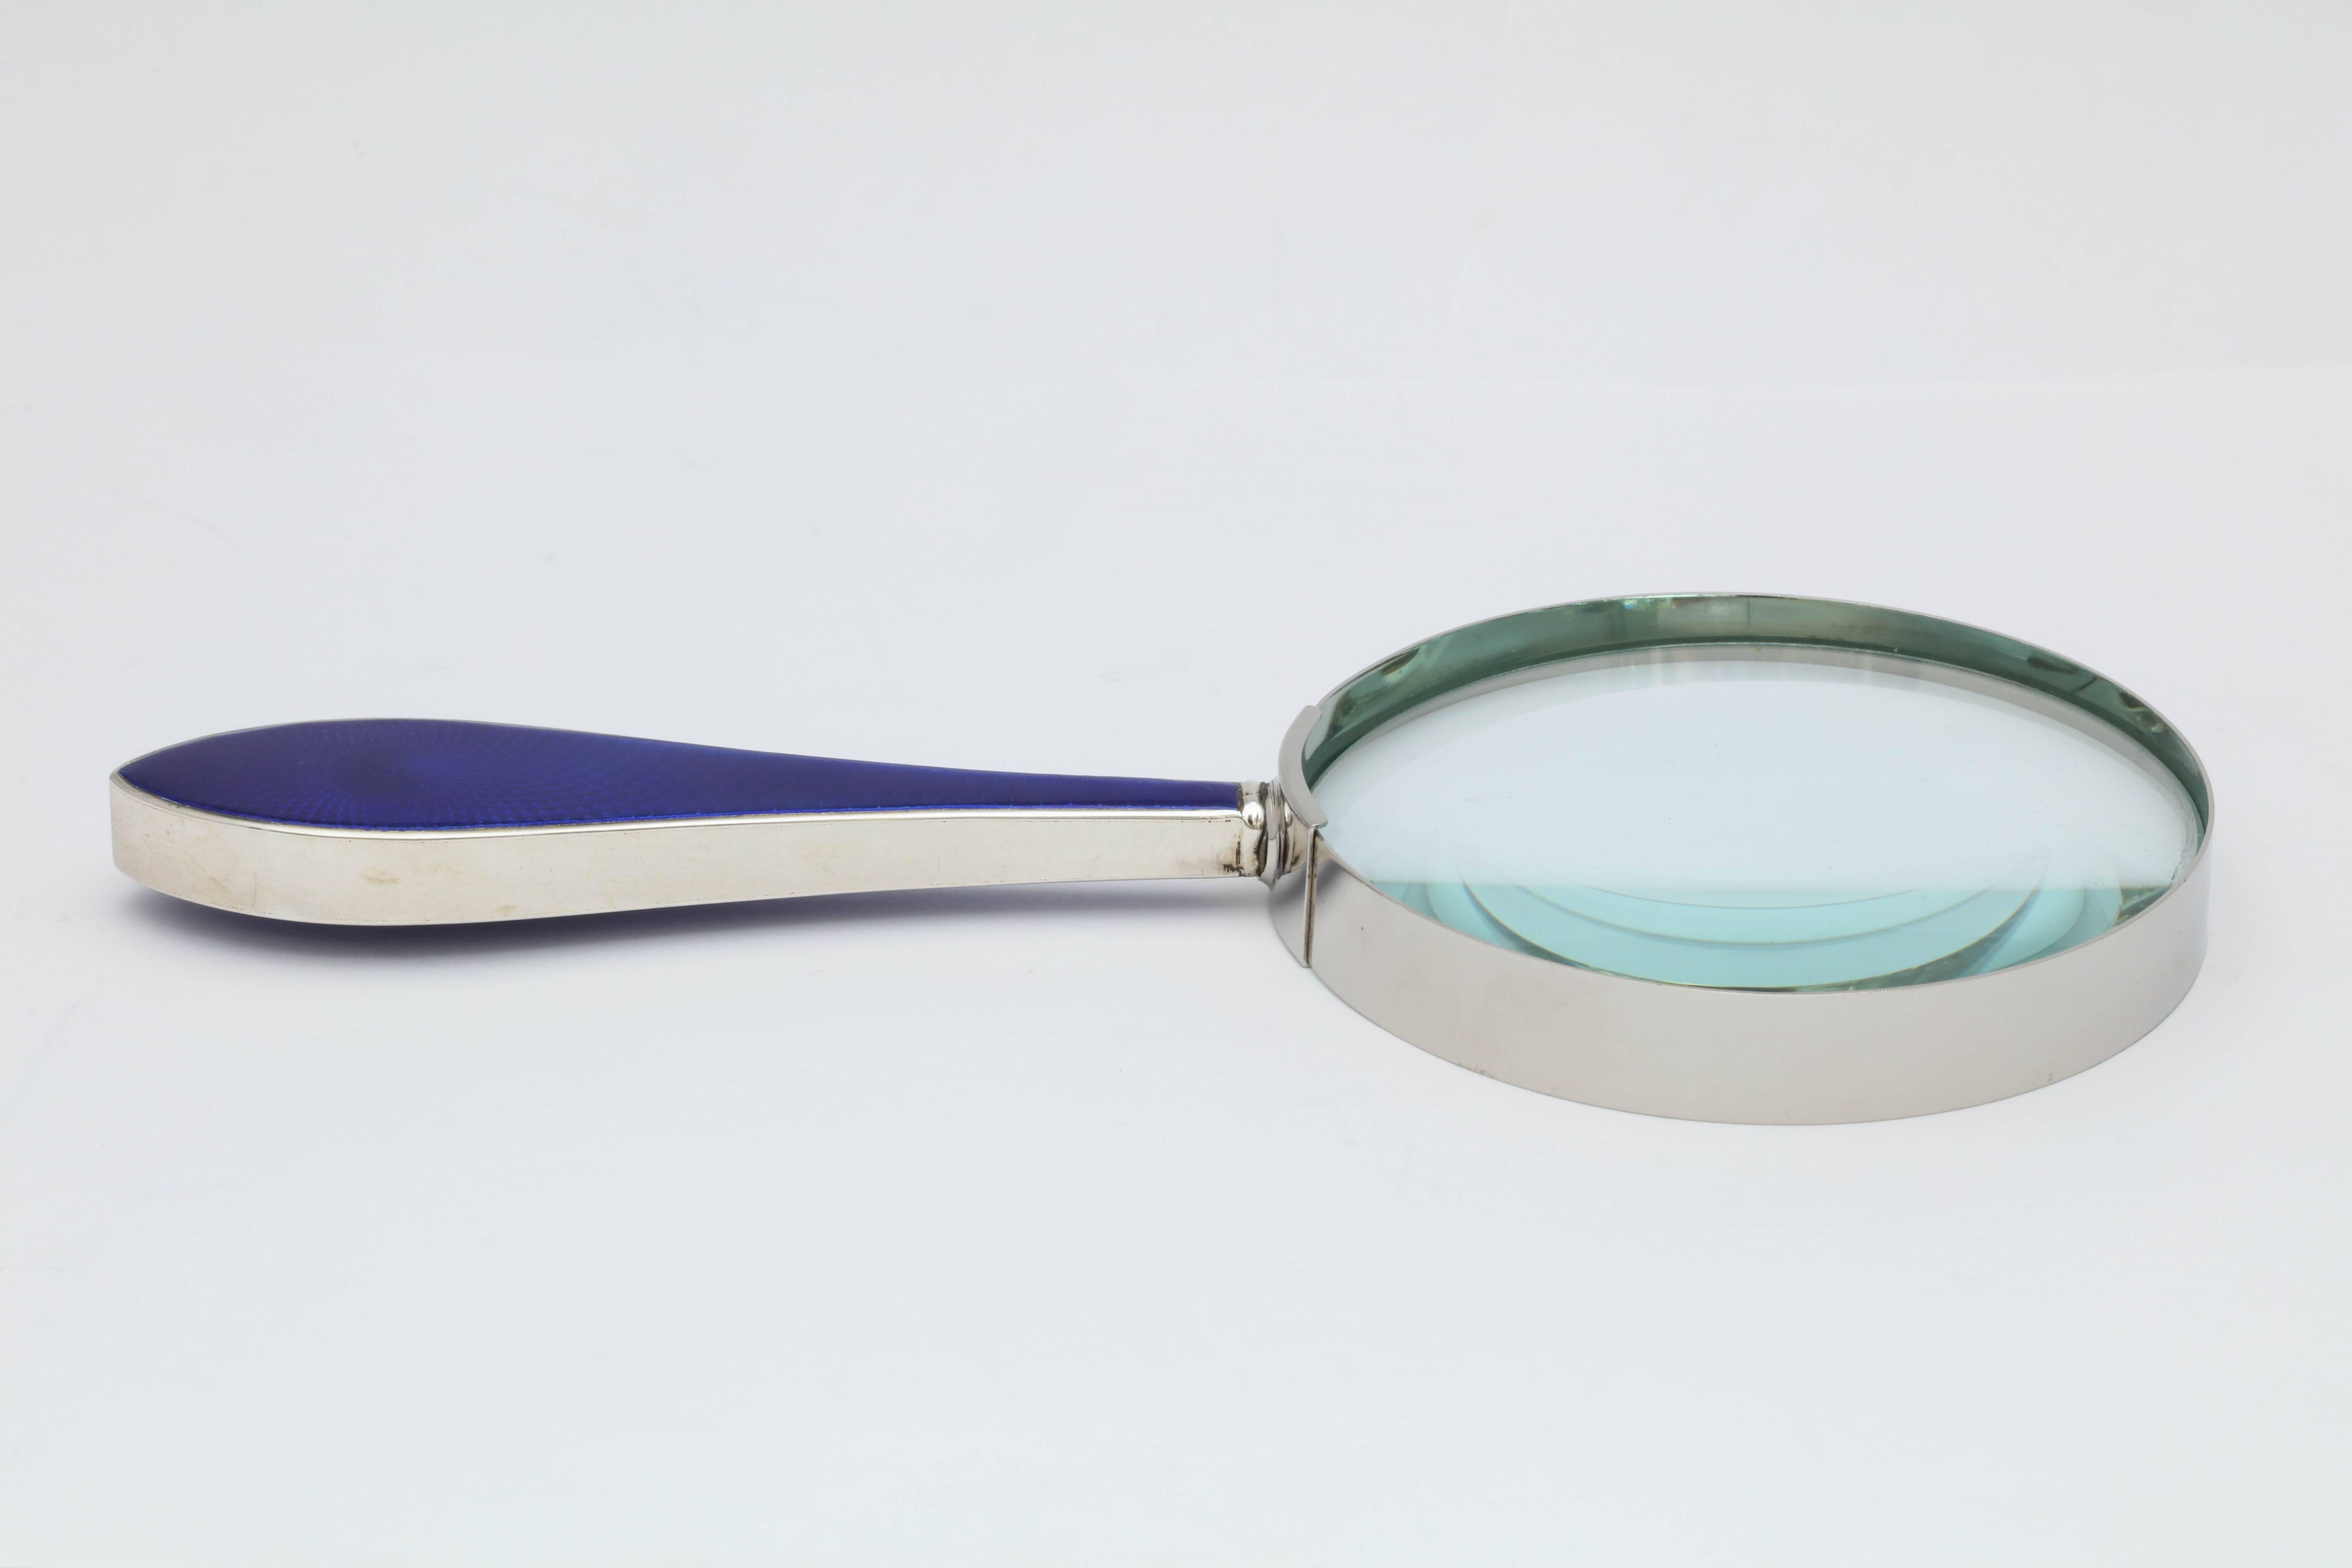 Art Deco Sterling Silver-Mounted Cobalt Blue Guilloche Enamel Magnifying Glass 1